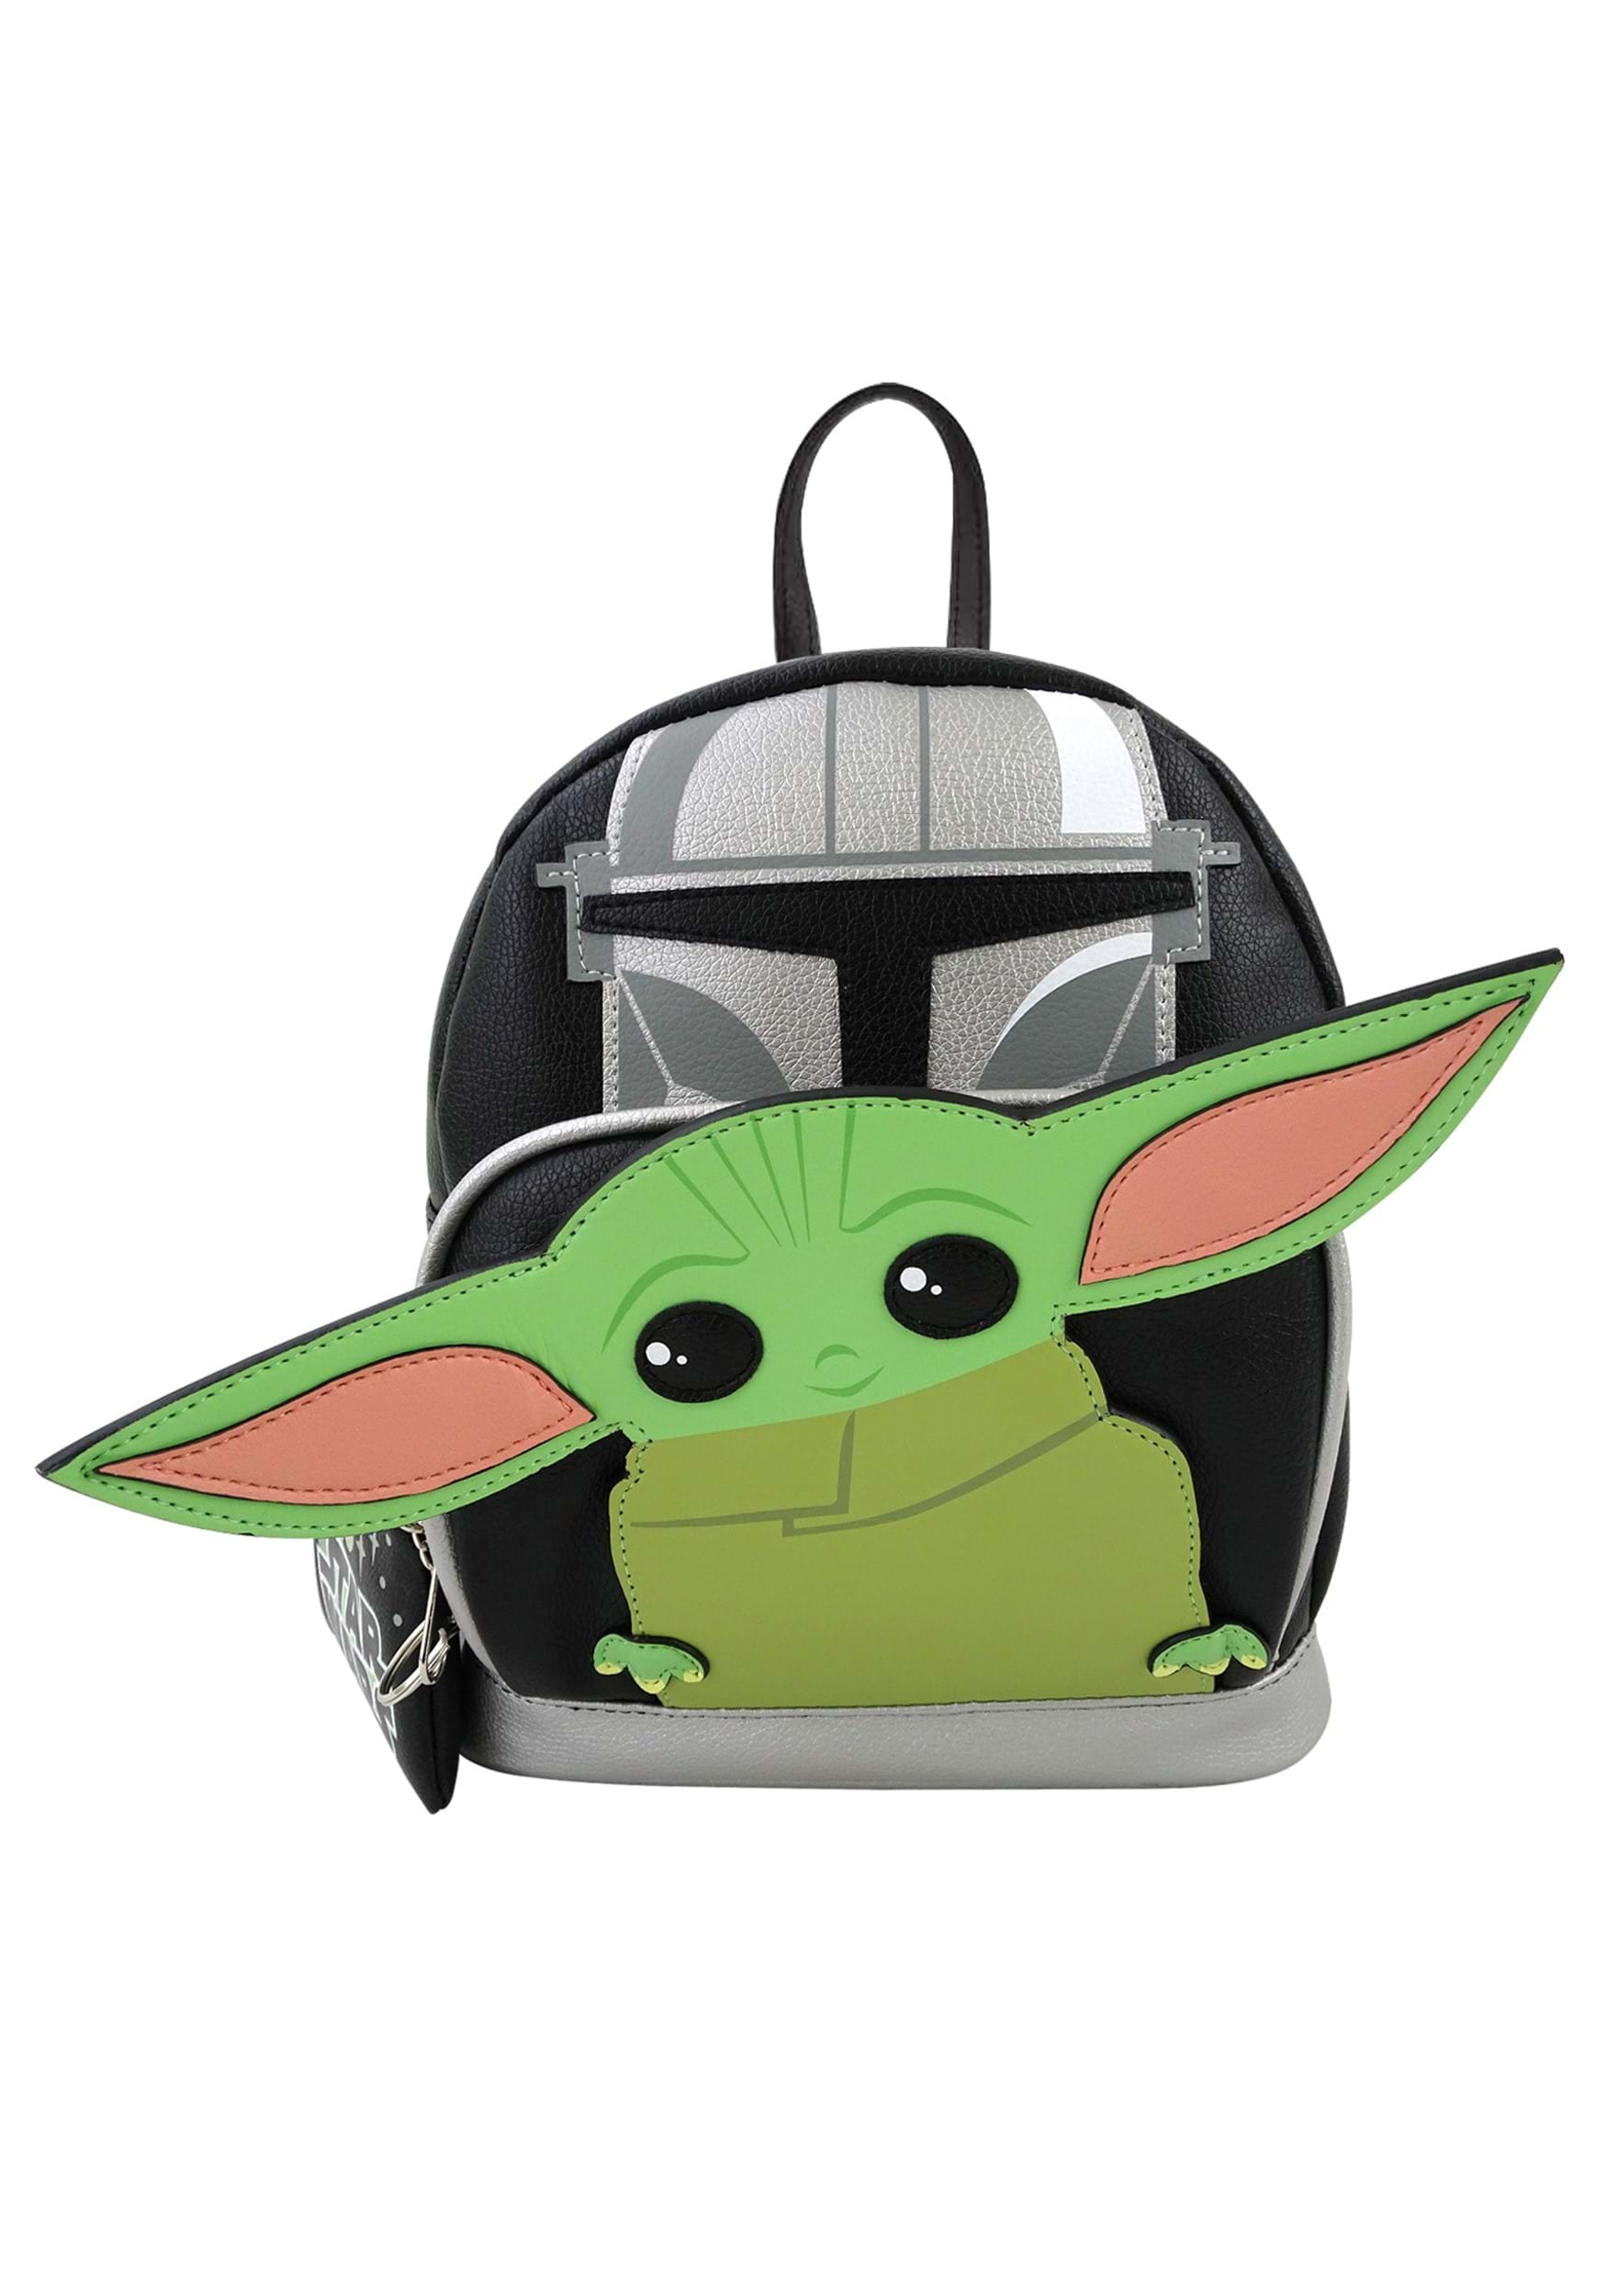 Star Wars The Child 10 inch Pleather Backpack W Coin Purse